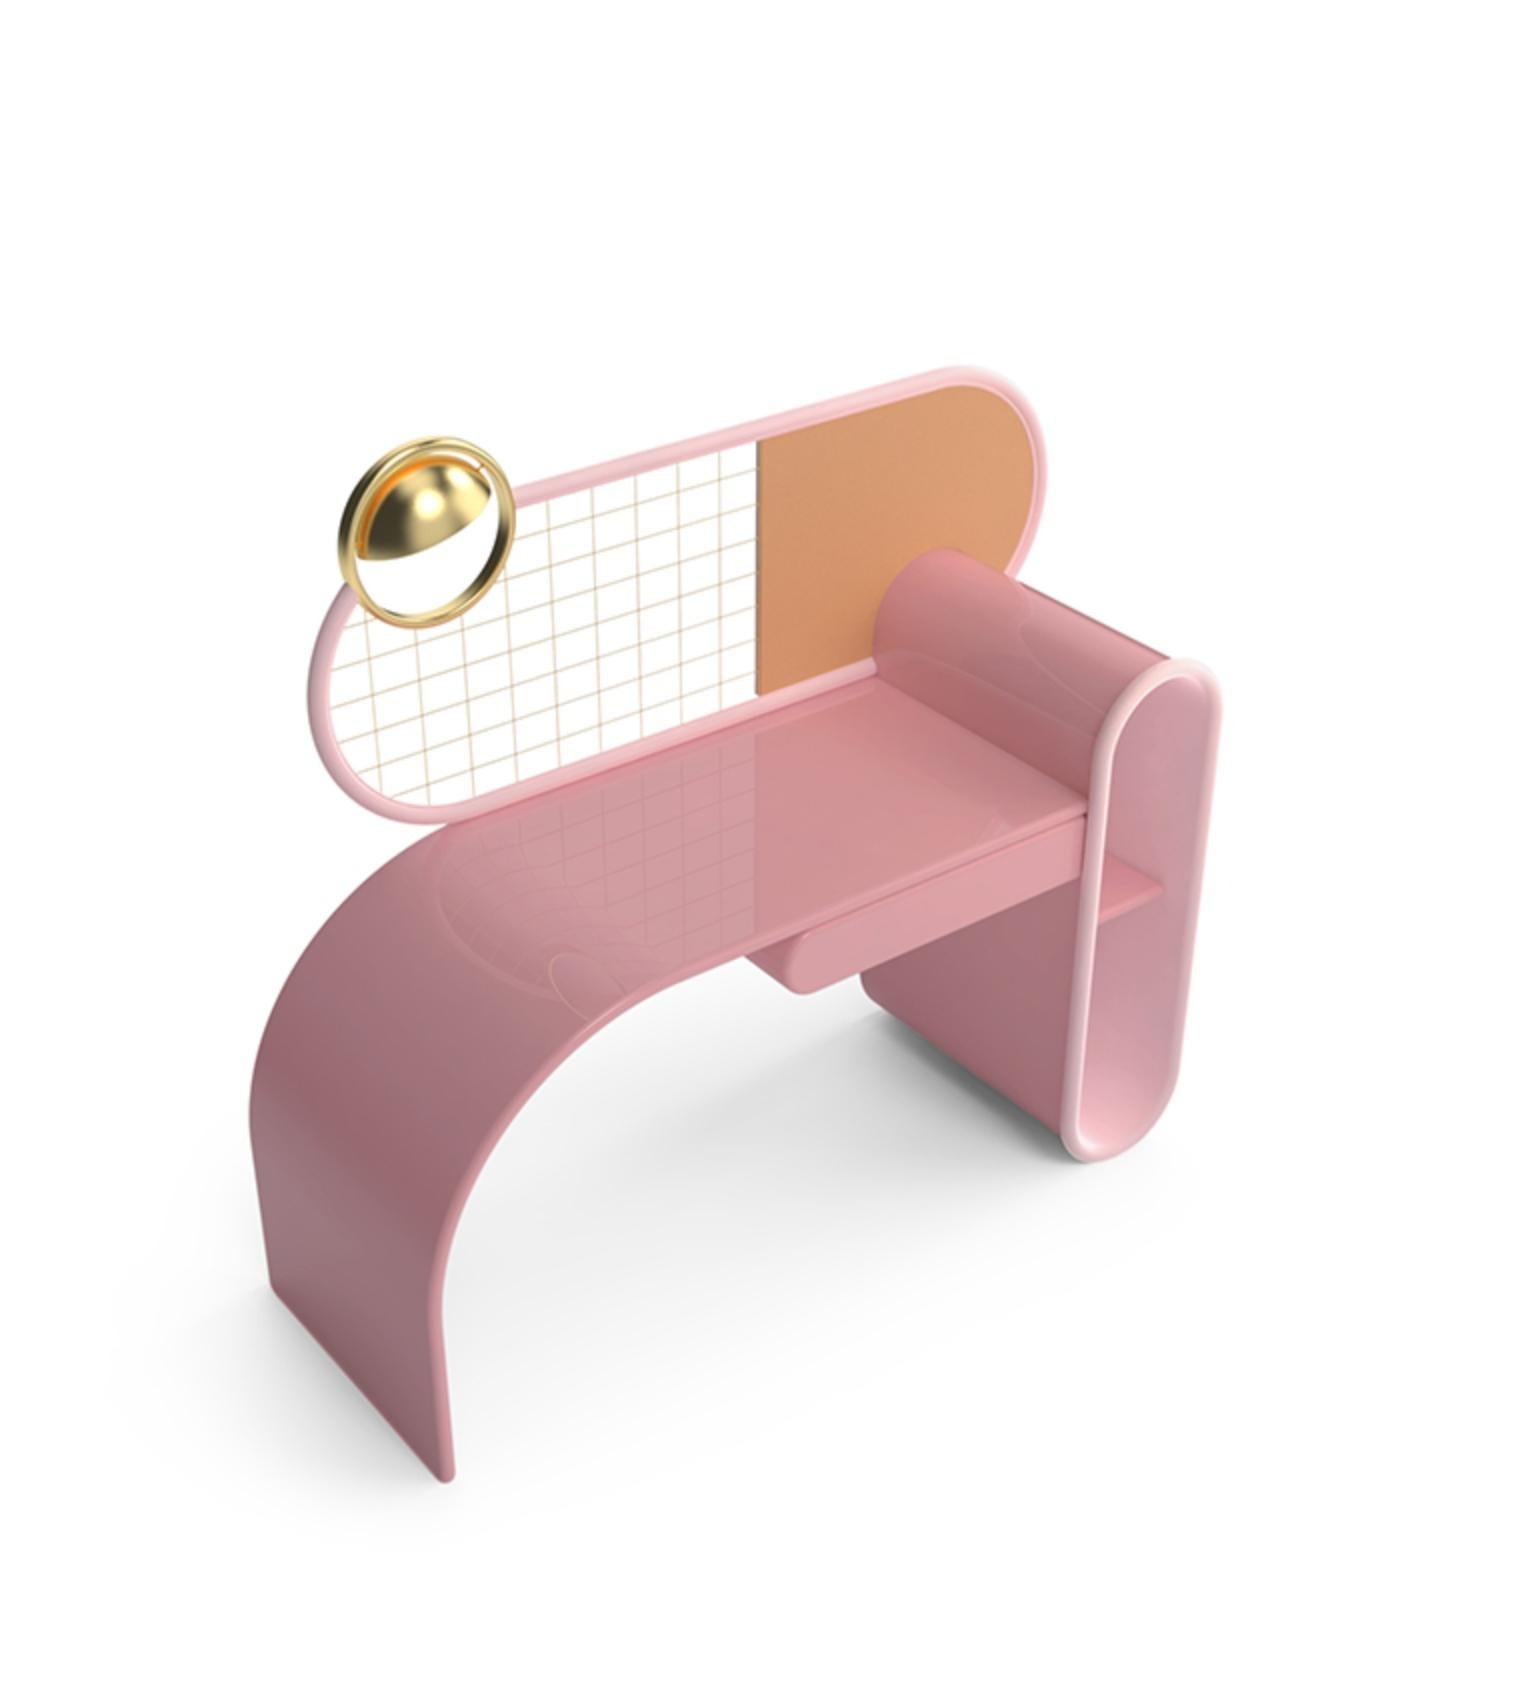 Bubble Gum Desk with Lacquered wood and LED Light by Circu Magical Furniture

Inspired by the sweetness of kids' favorite candies our Bubble Gum Desk is specially made to make homework time into a sweet moment for kids. The curved shapes of the desk